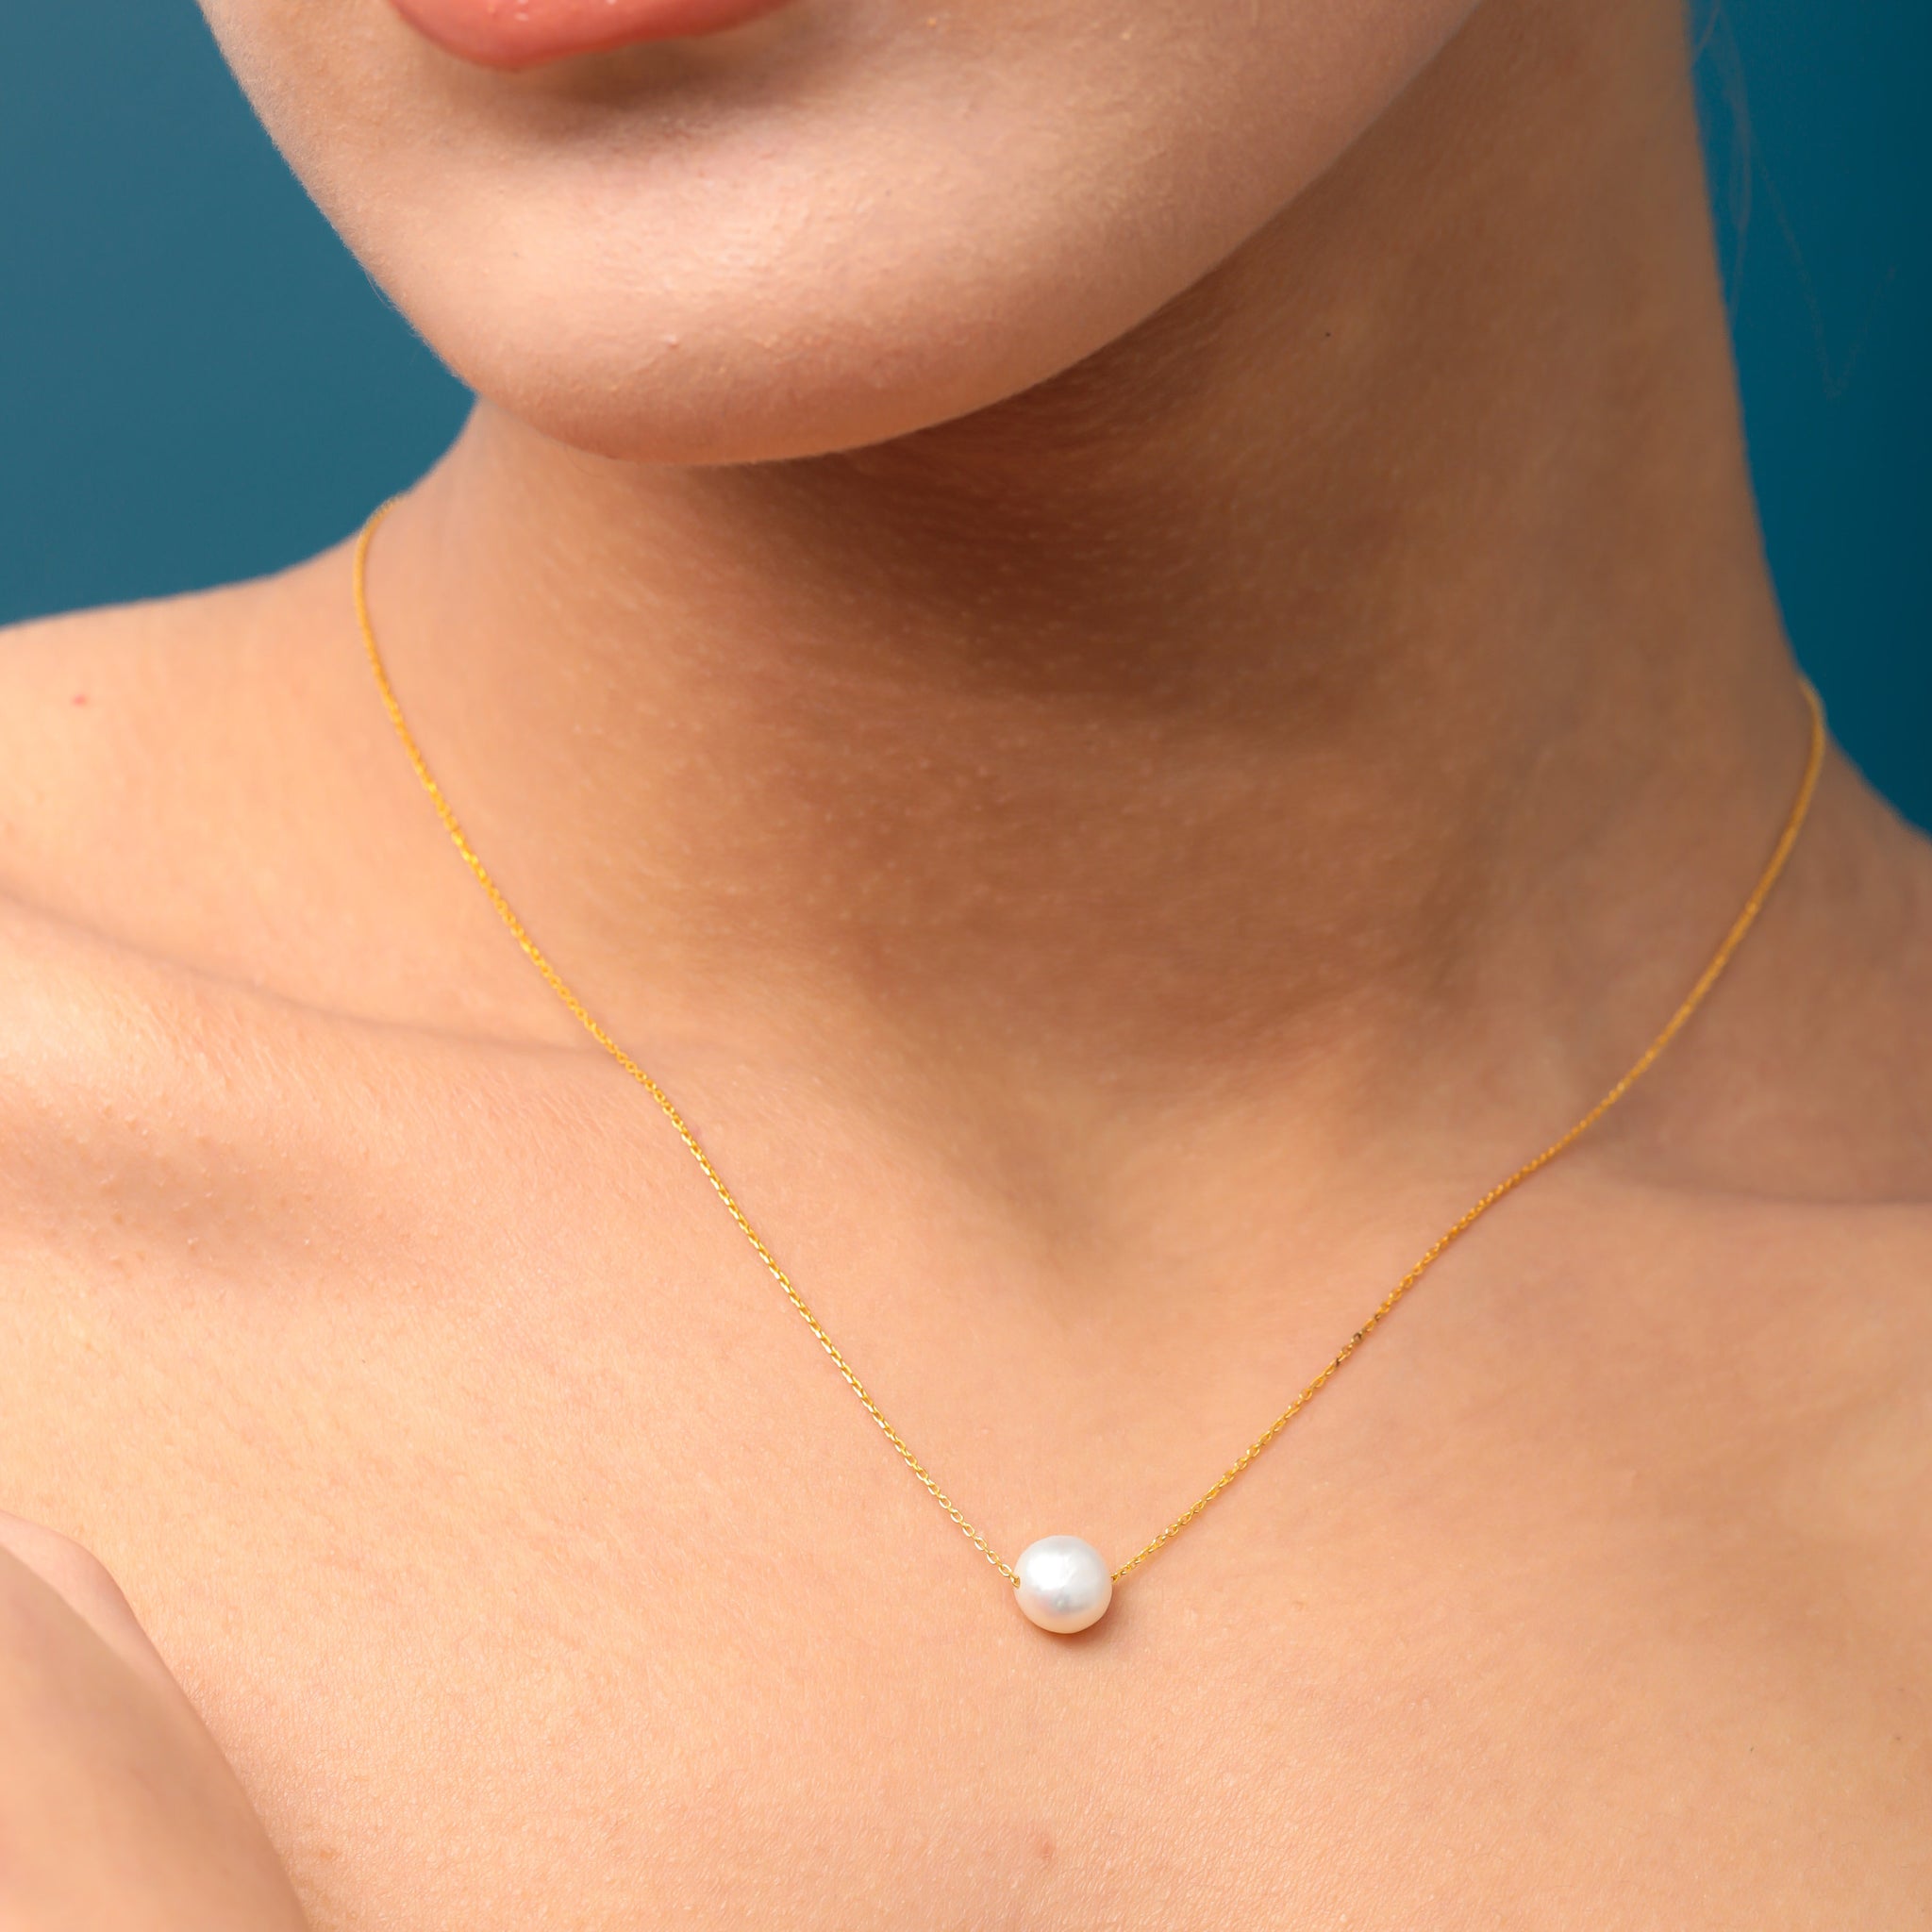 Single Pearl Choker 14K White Gold, Rose Gold Single Freshwater Pearl Necklace, Bridesmaid Necklace, Wedding Gift, Silver Pearl Choker